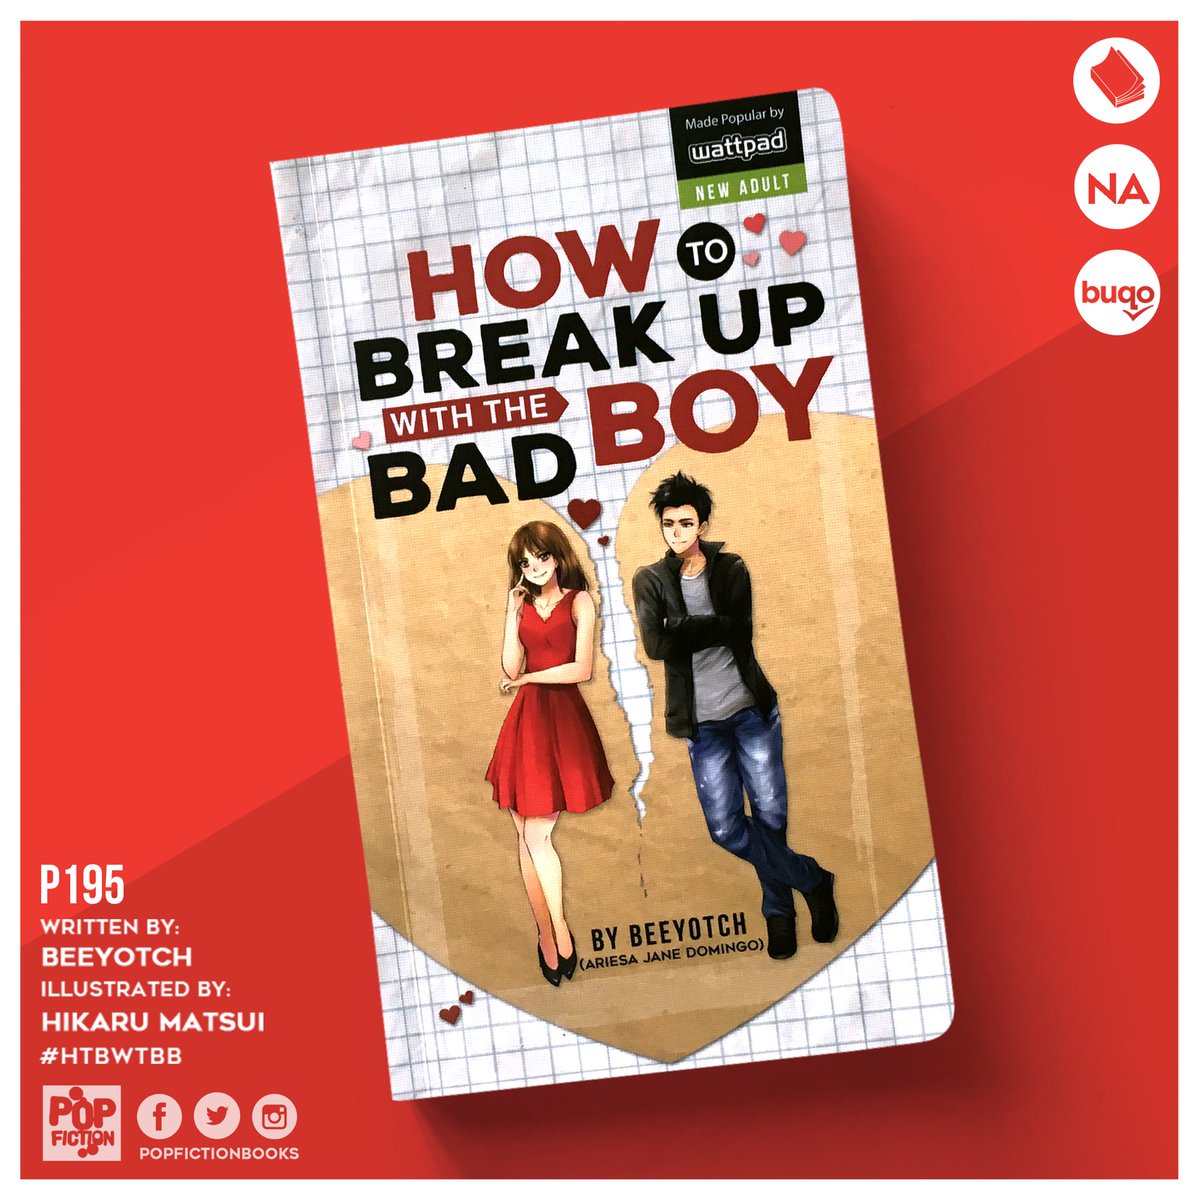 #POPFICREVEAL!!! 🙊🙊🙊 #HTBWTBB written by @beeyotchWP. Out now in bookstores, convenience stores and on @Buqo!